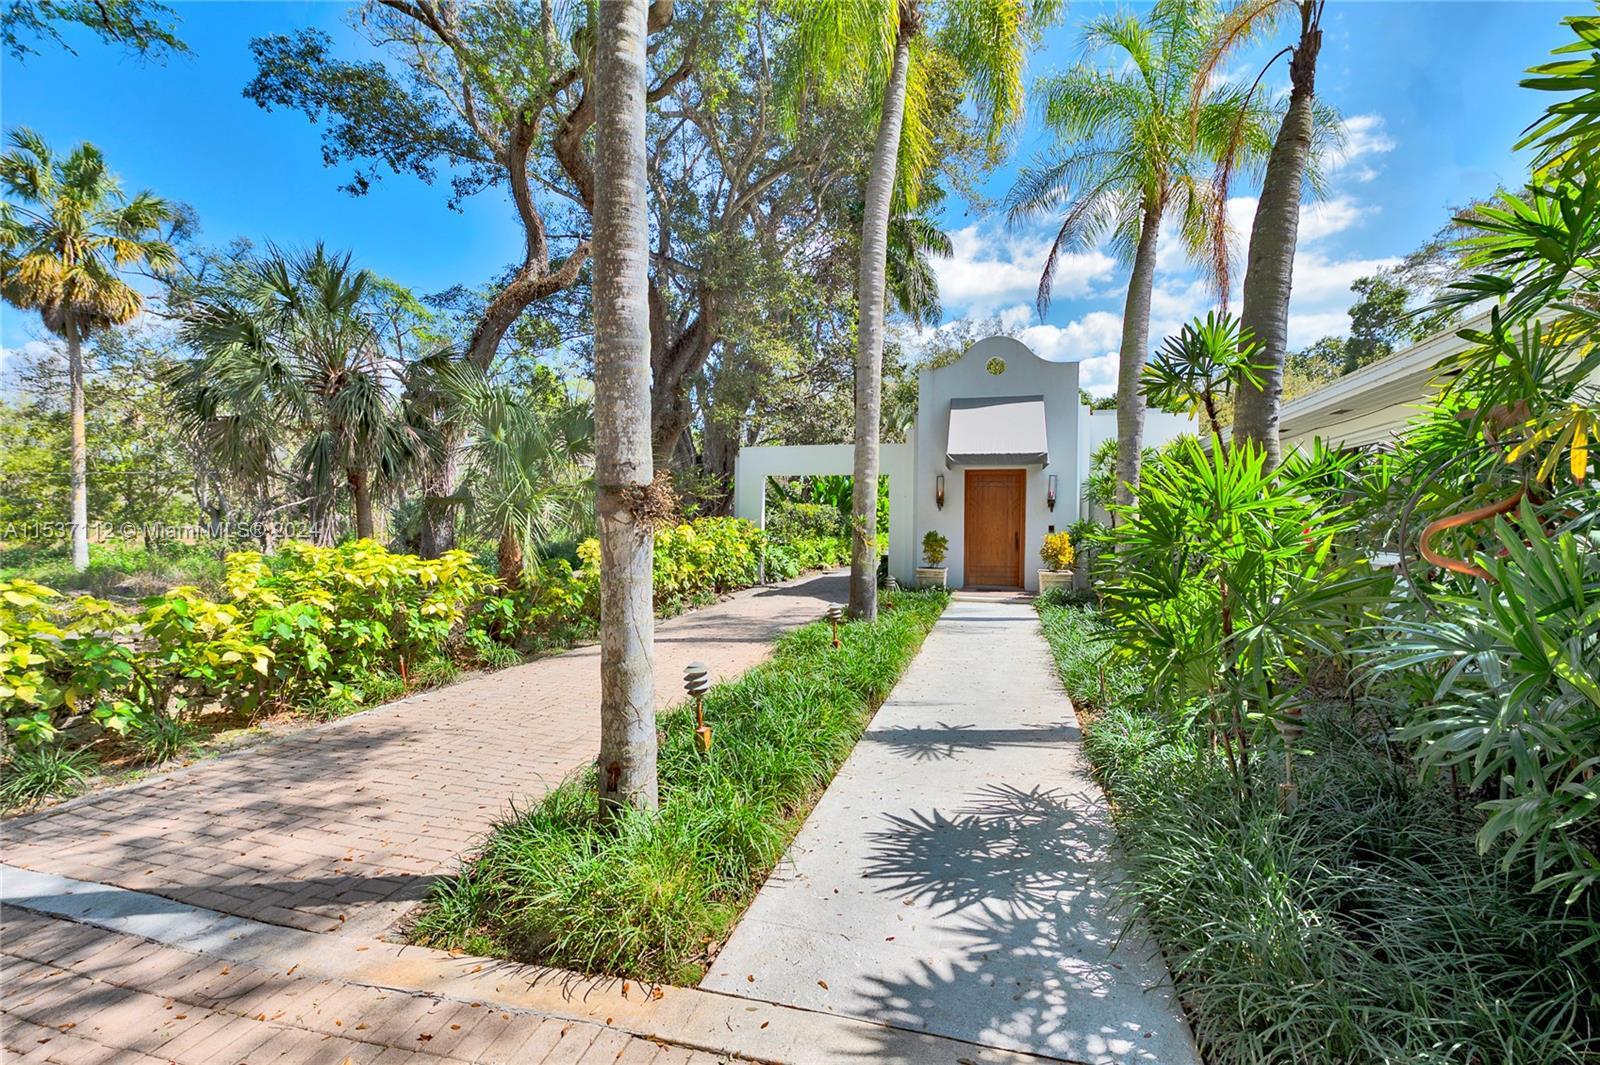 Photo of 5465 Banyan Trl in Coral Gables, FL